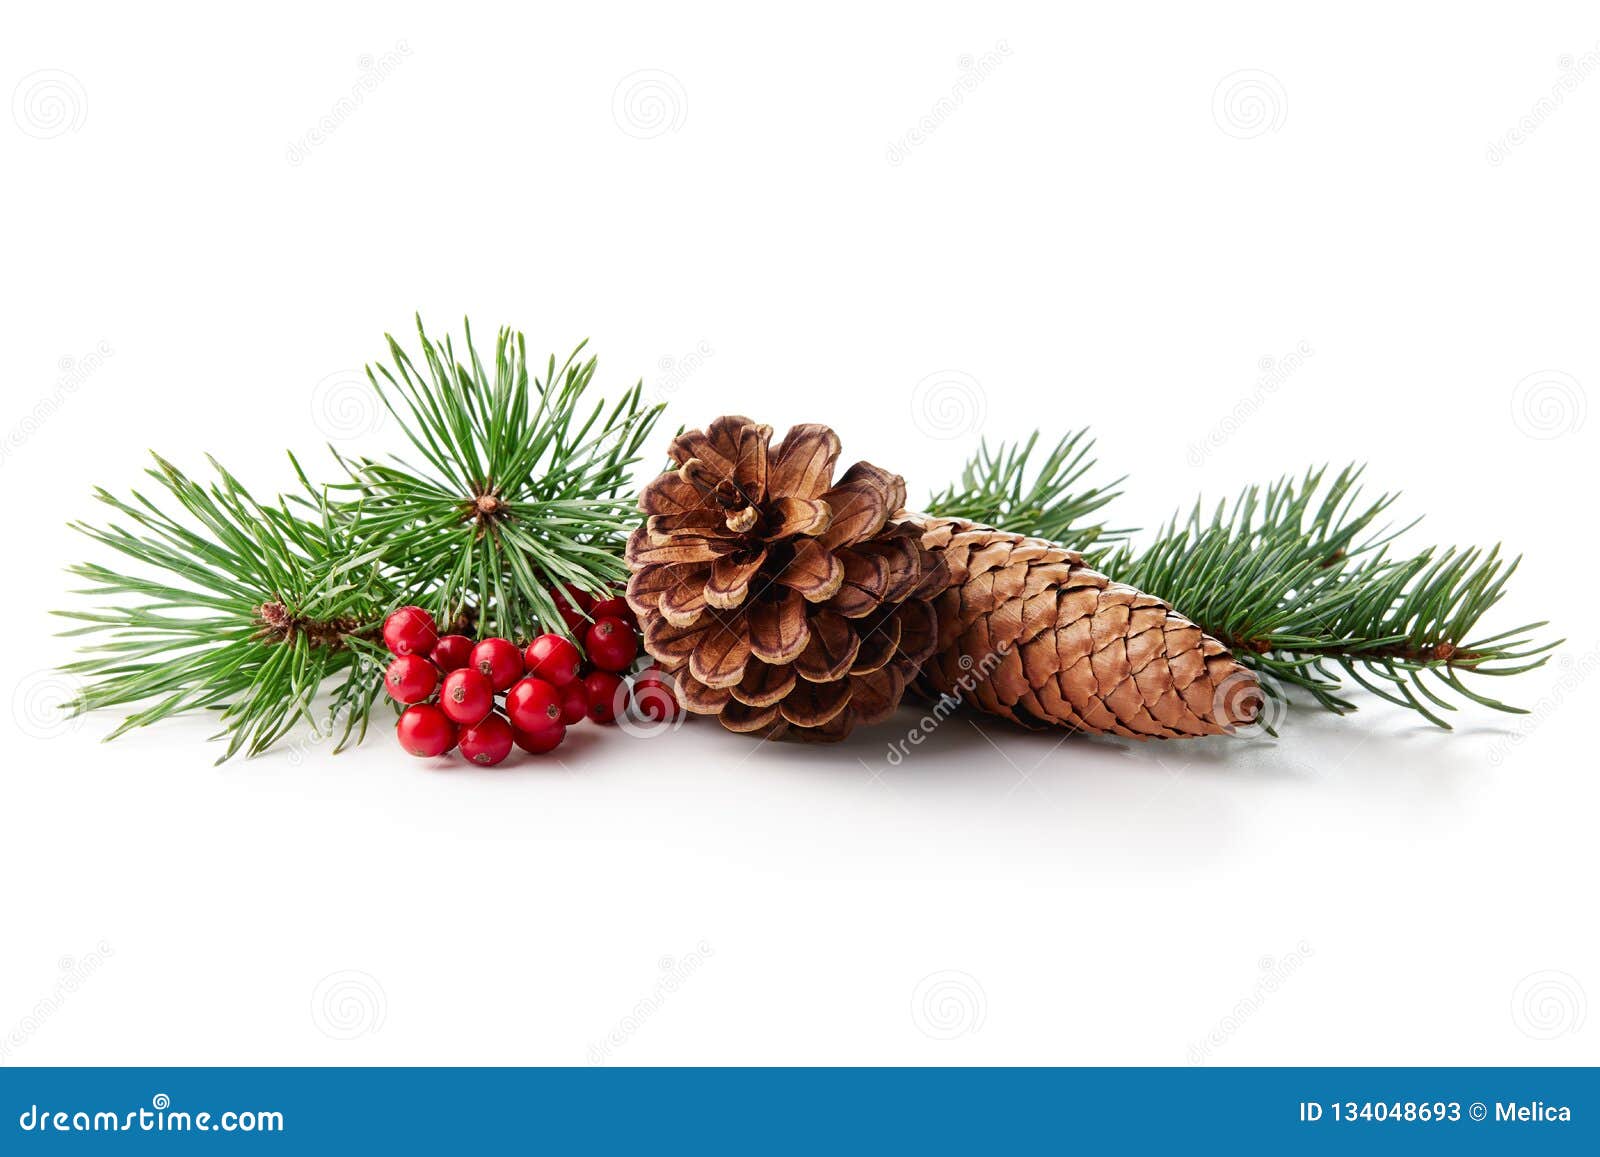 christmas decoration of holly berry and pine cone